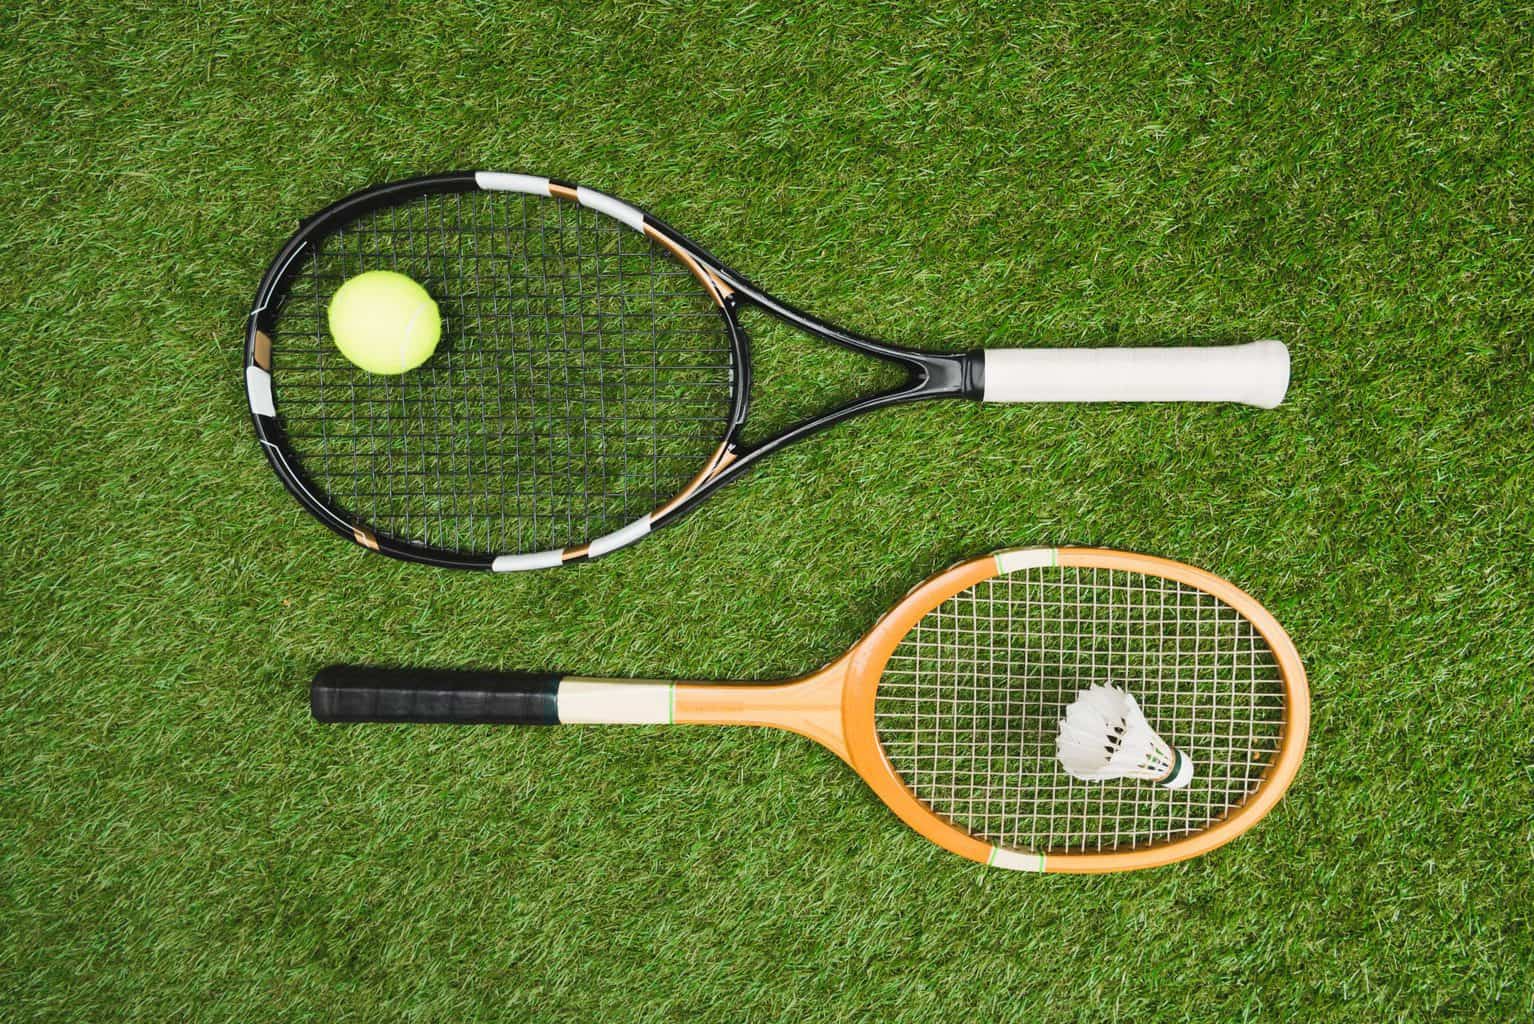 Tennis Racket Vs Racquet Whats The Difference Racquet Sports Center